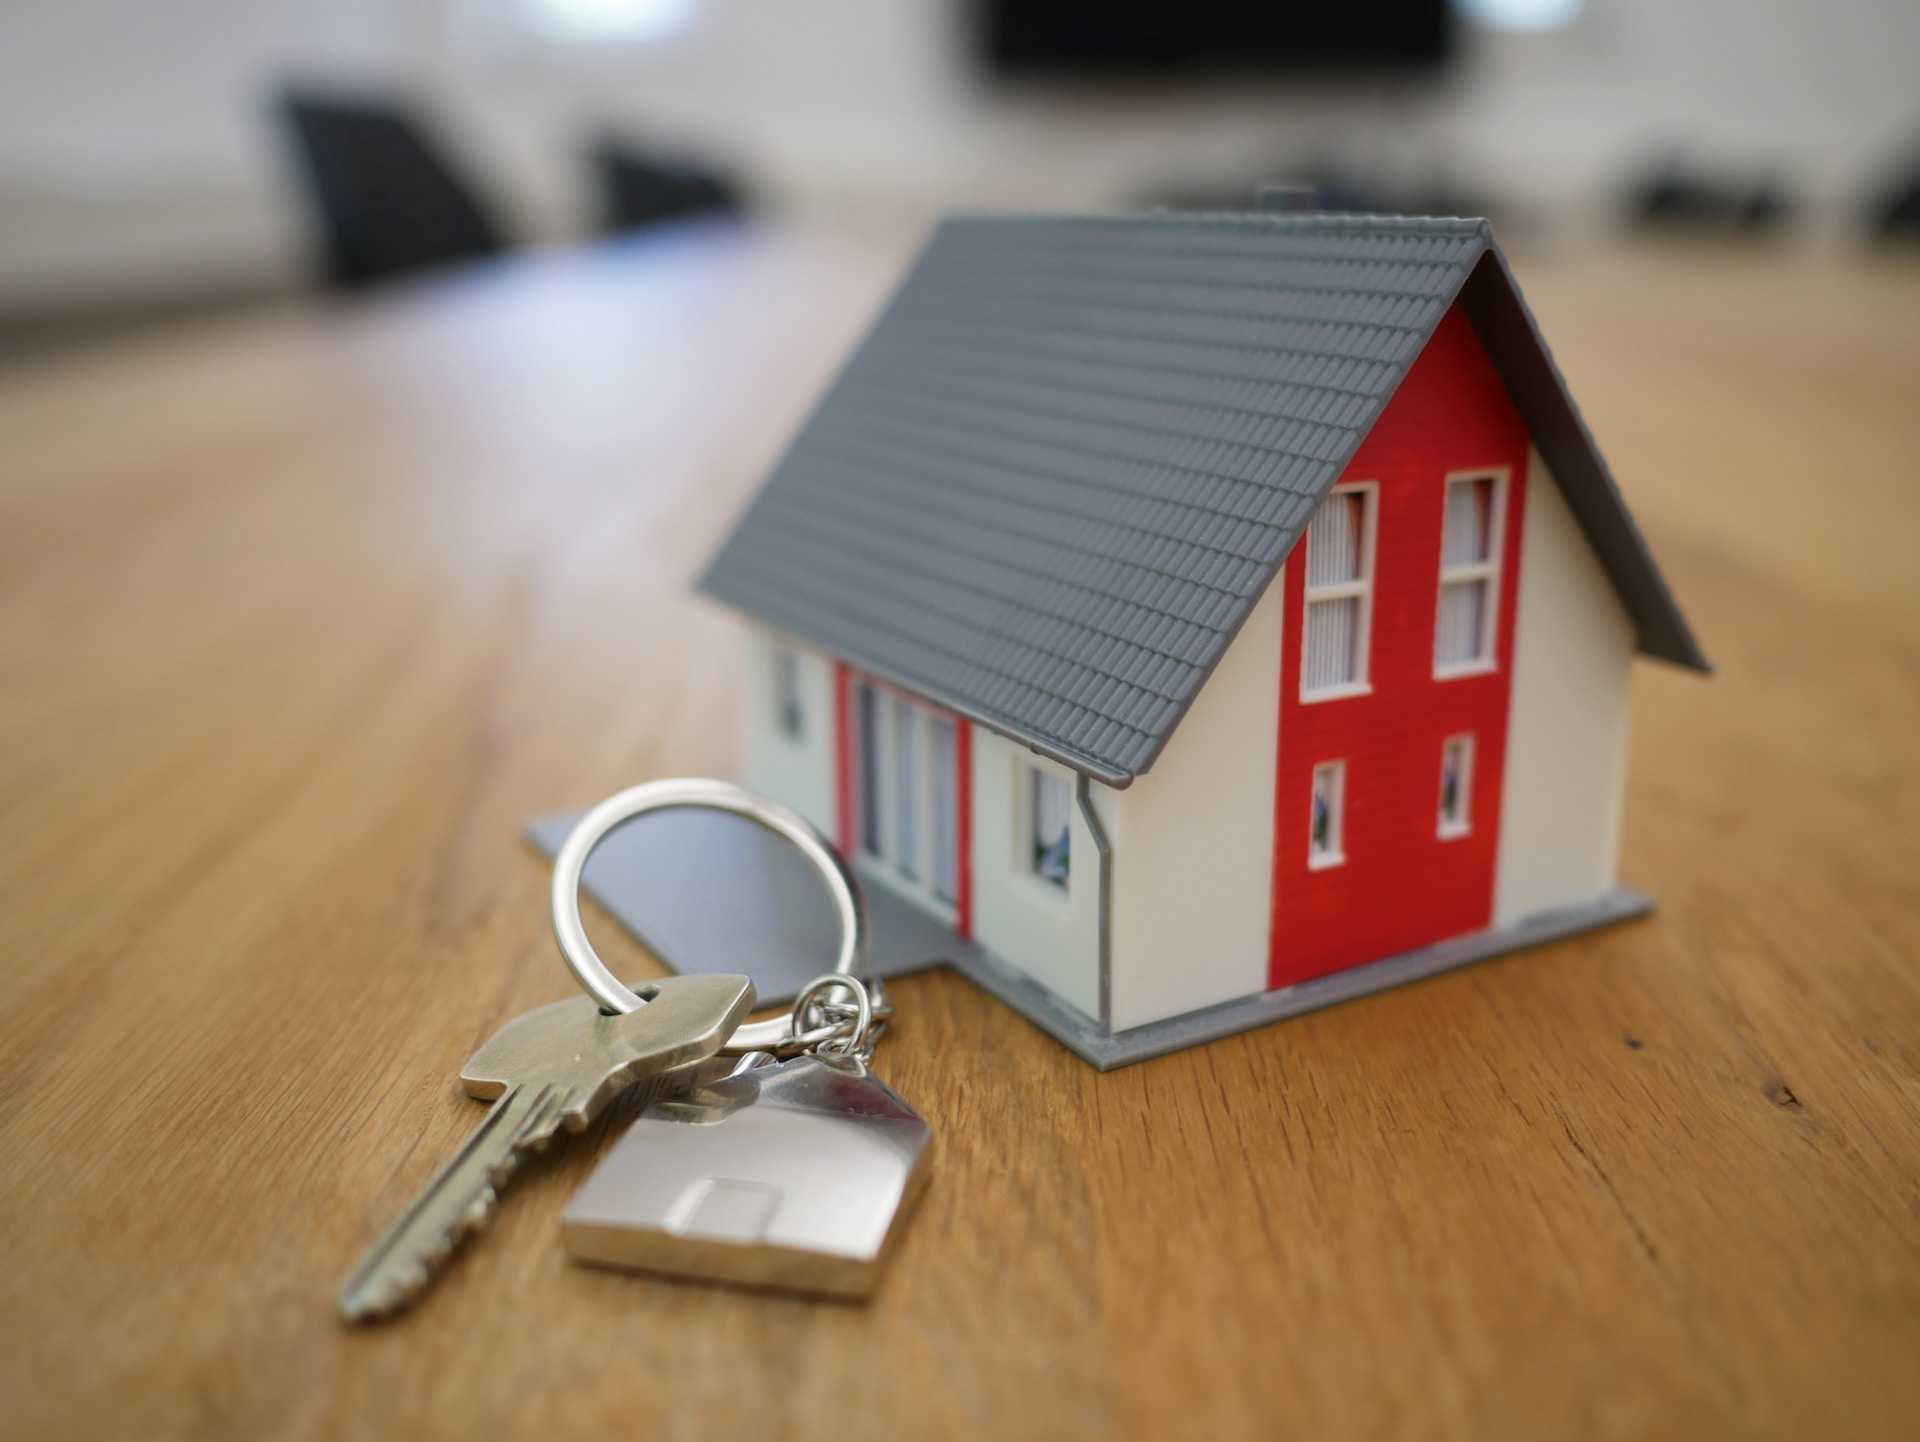 picture of a 3-D printed miniature figure of a house next to a key on a keyring
